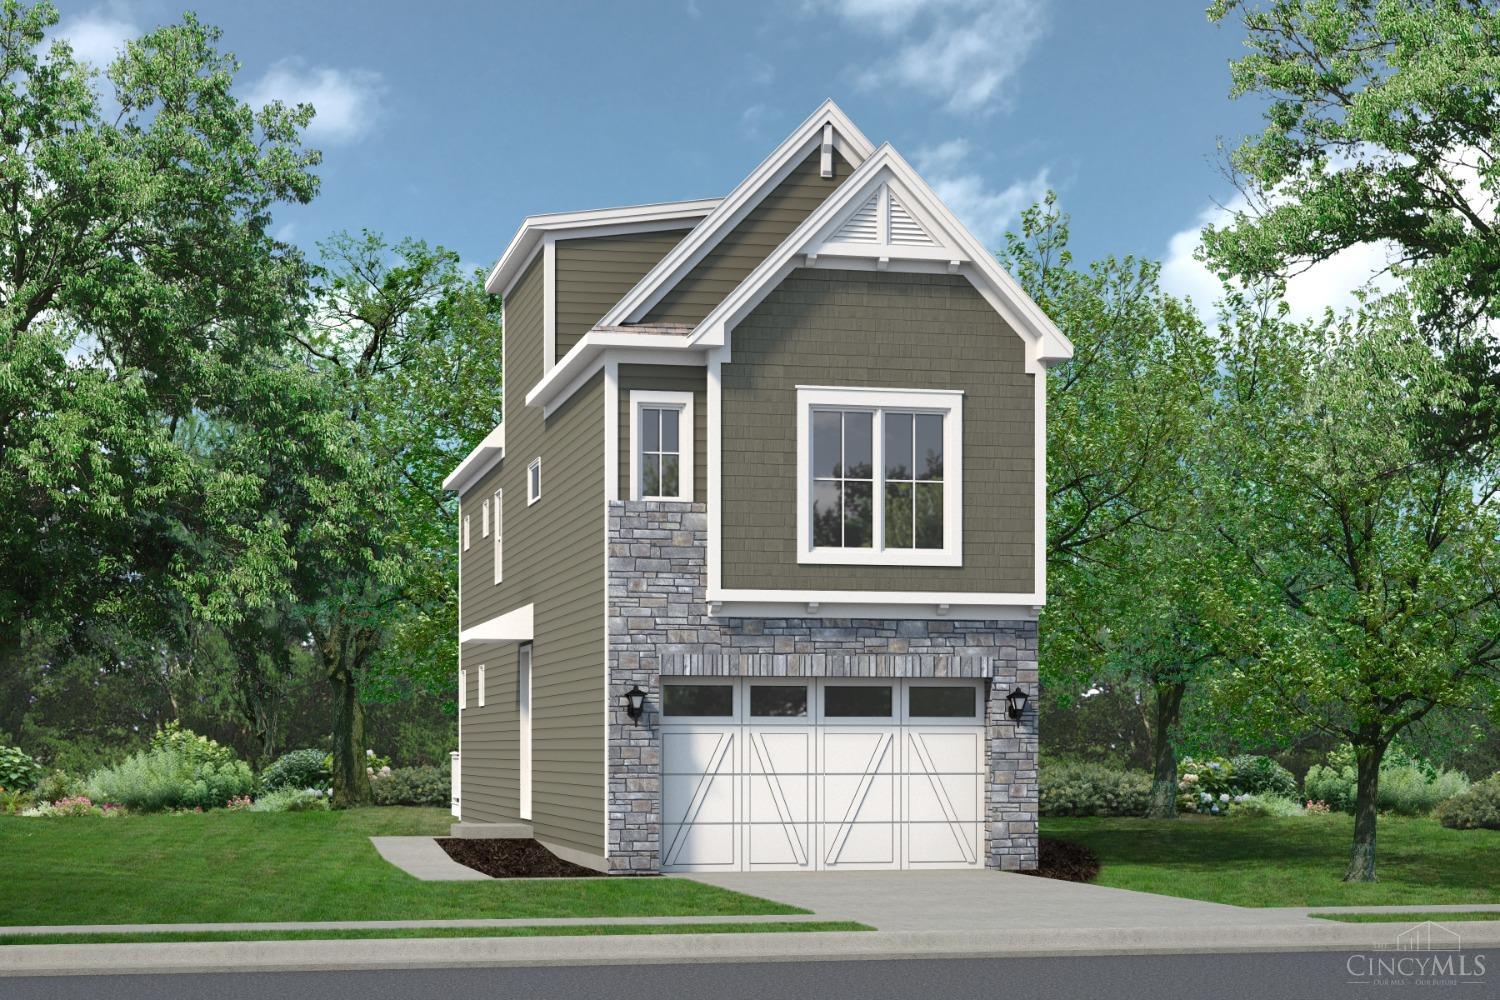 Brand new home just seconds from everything in Oakley! You can have it all: 1,759 finished sqft (w/ option to finish LL), hardwood flrs, great rm w/  fireplace, gourmet kitchen, primary suite w/ walk-in clst, high end finishes, 2 car garage, rear deck & rooftop deck! By Ashford Homes. Mins from Oakley Sq, walkable to MadTree Brewing, dining-shopping, new 3.5M Rec Center, & more!